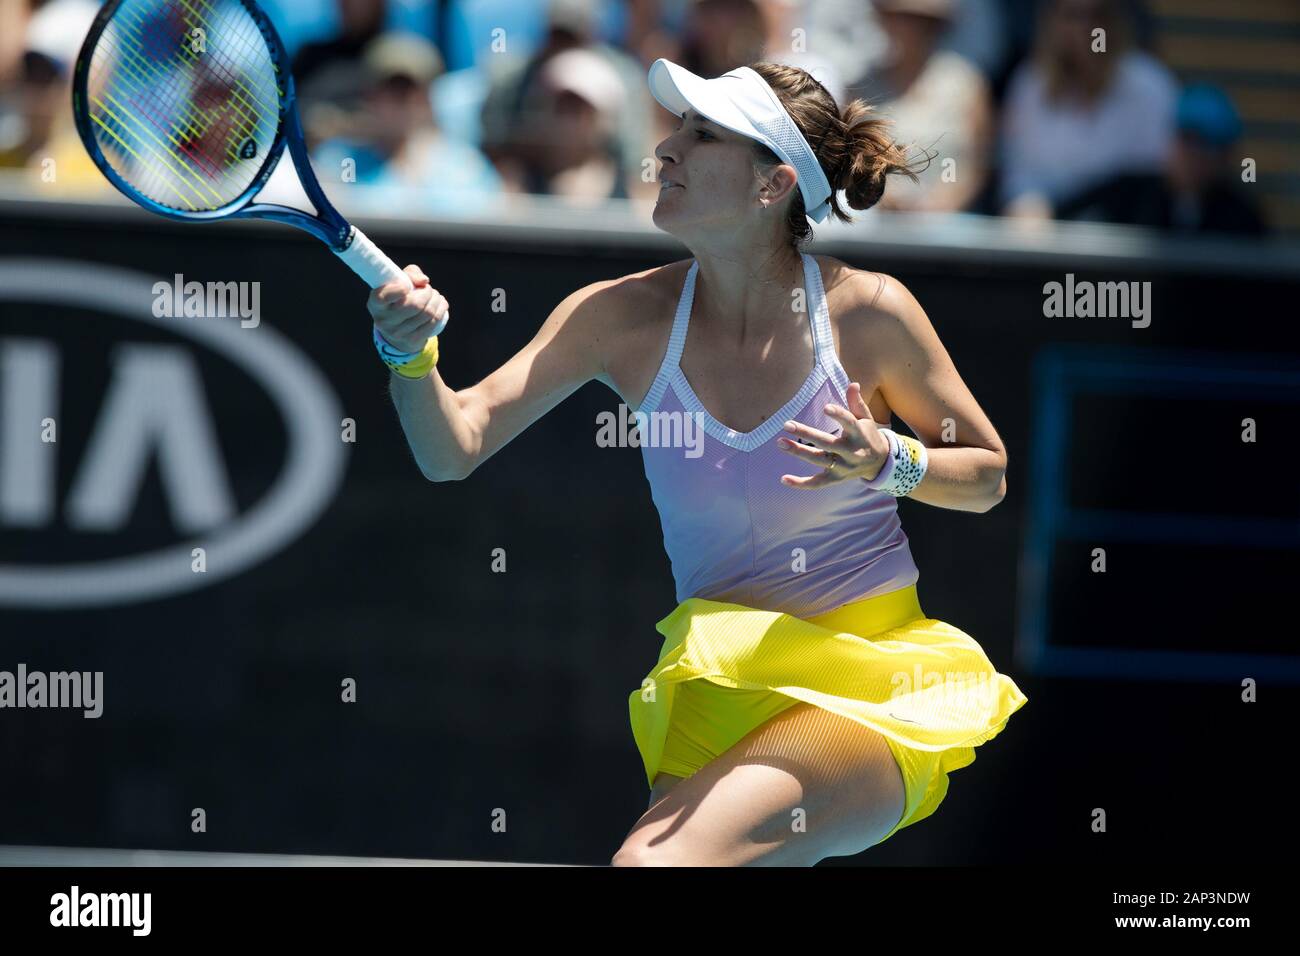 Melbourne, Australia. 21st Jan, 2020. Belinda Bencic of Switzerland playing  Anna Karolina Schmiedlova of Slovakia during the first round match at the  ATP Australian Open 2020 at Melbourne Park, Melbourne, Australia on